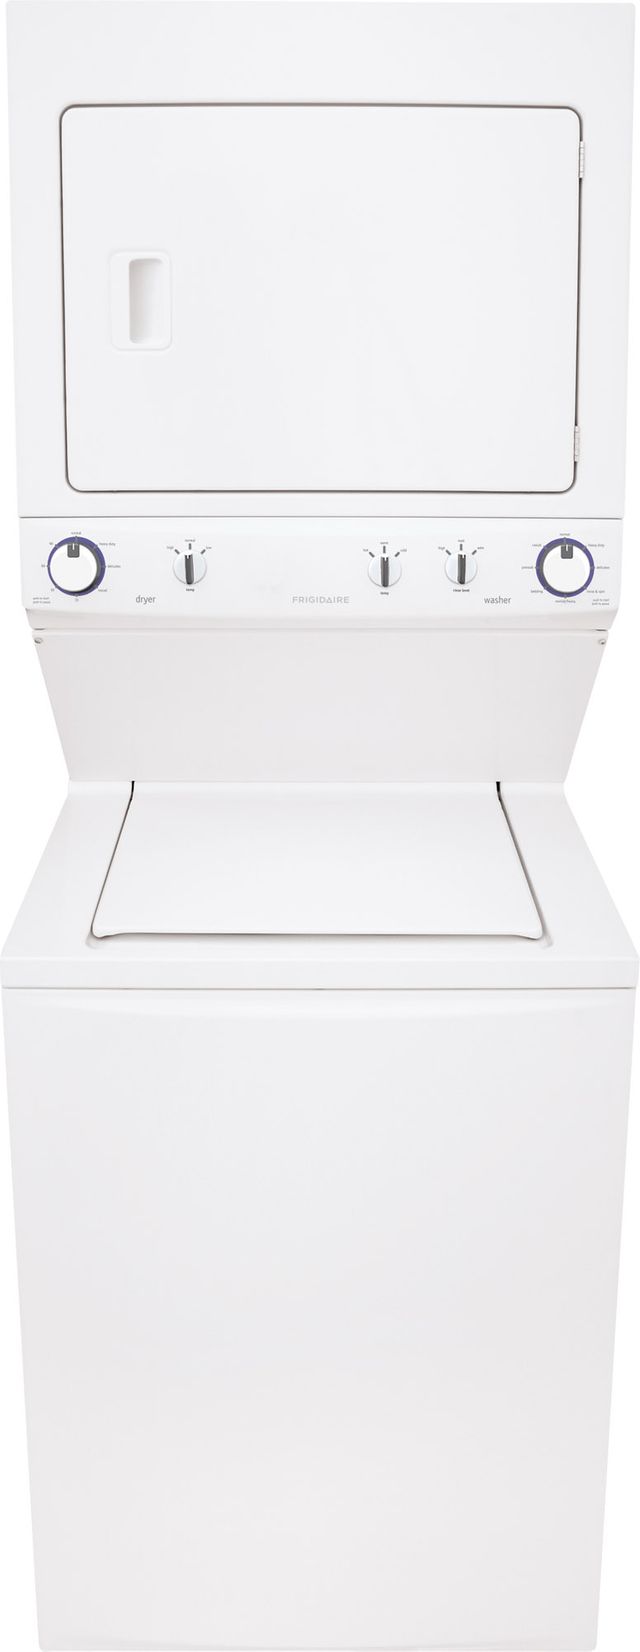 Frigidaire® Spacesaver Stack Laundry-White 1